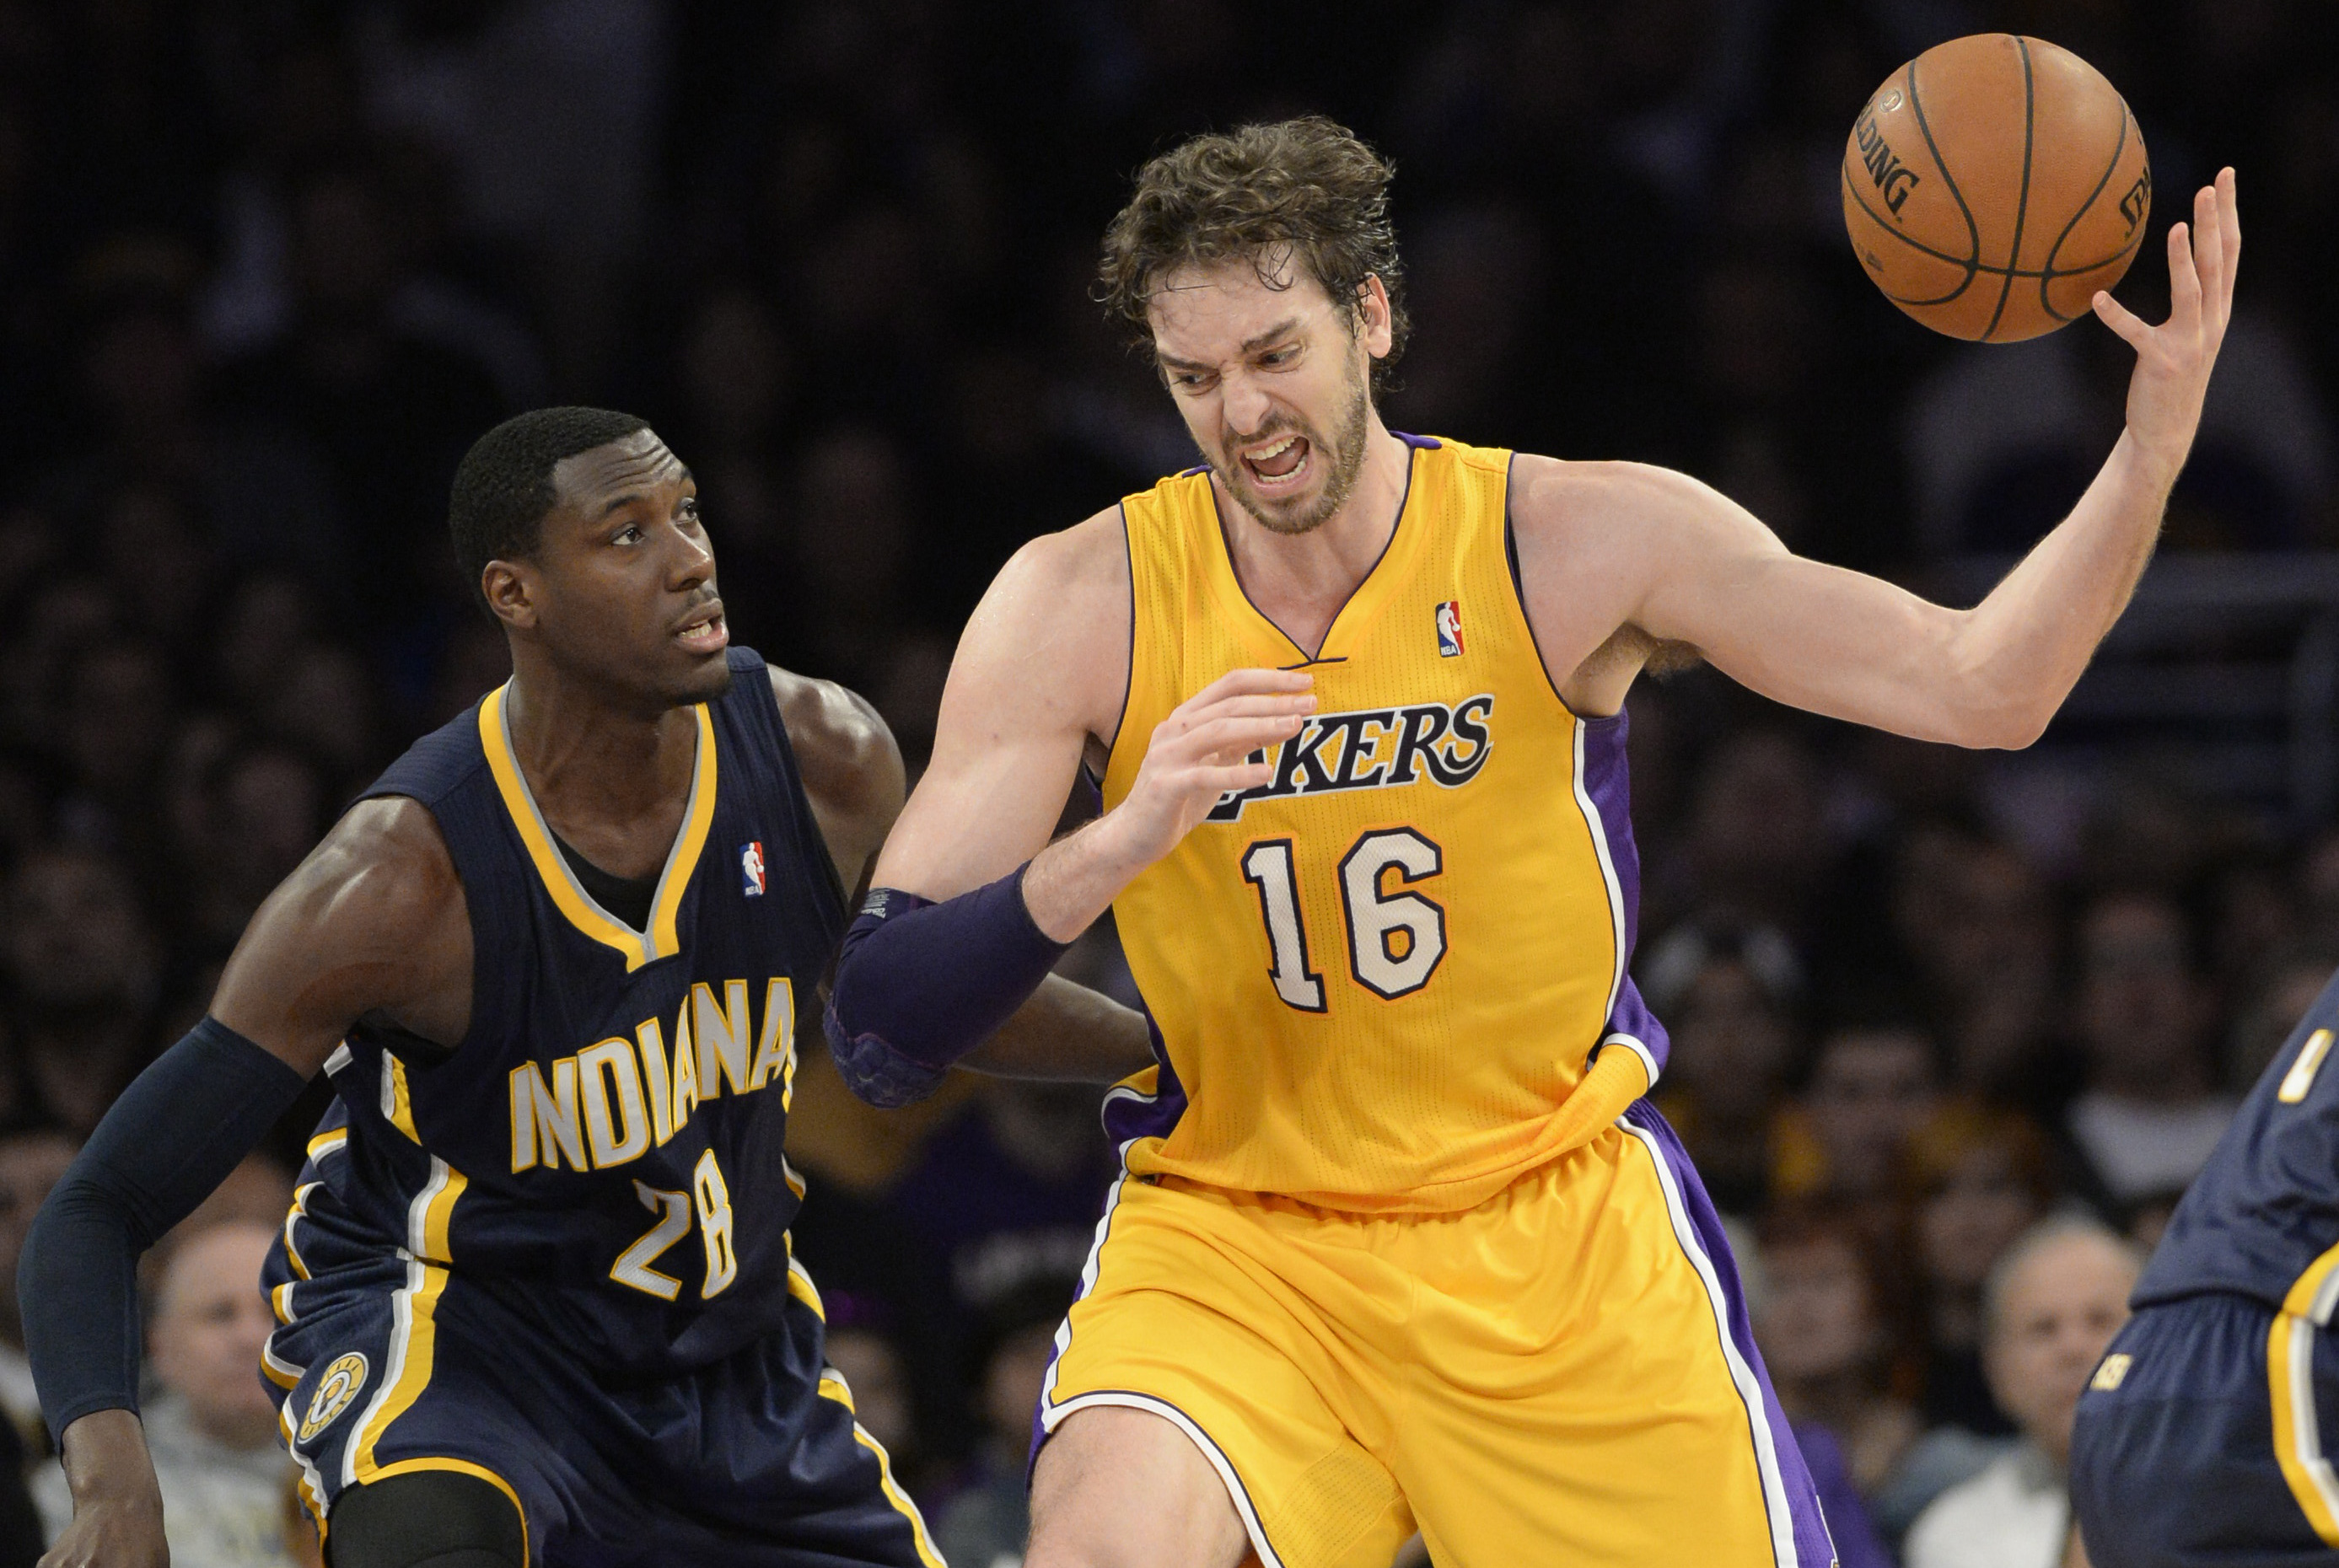 Los Angeles Lakers vs. Indiana Pacers Live Score and Analysis